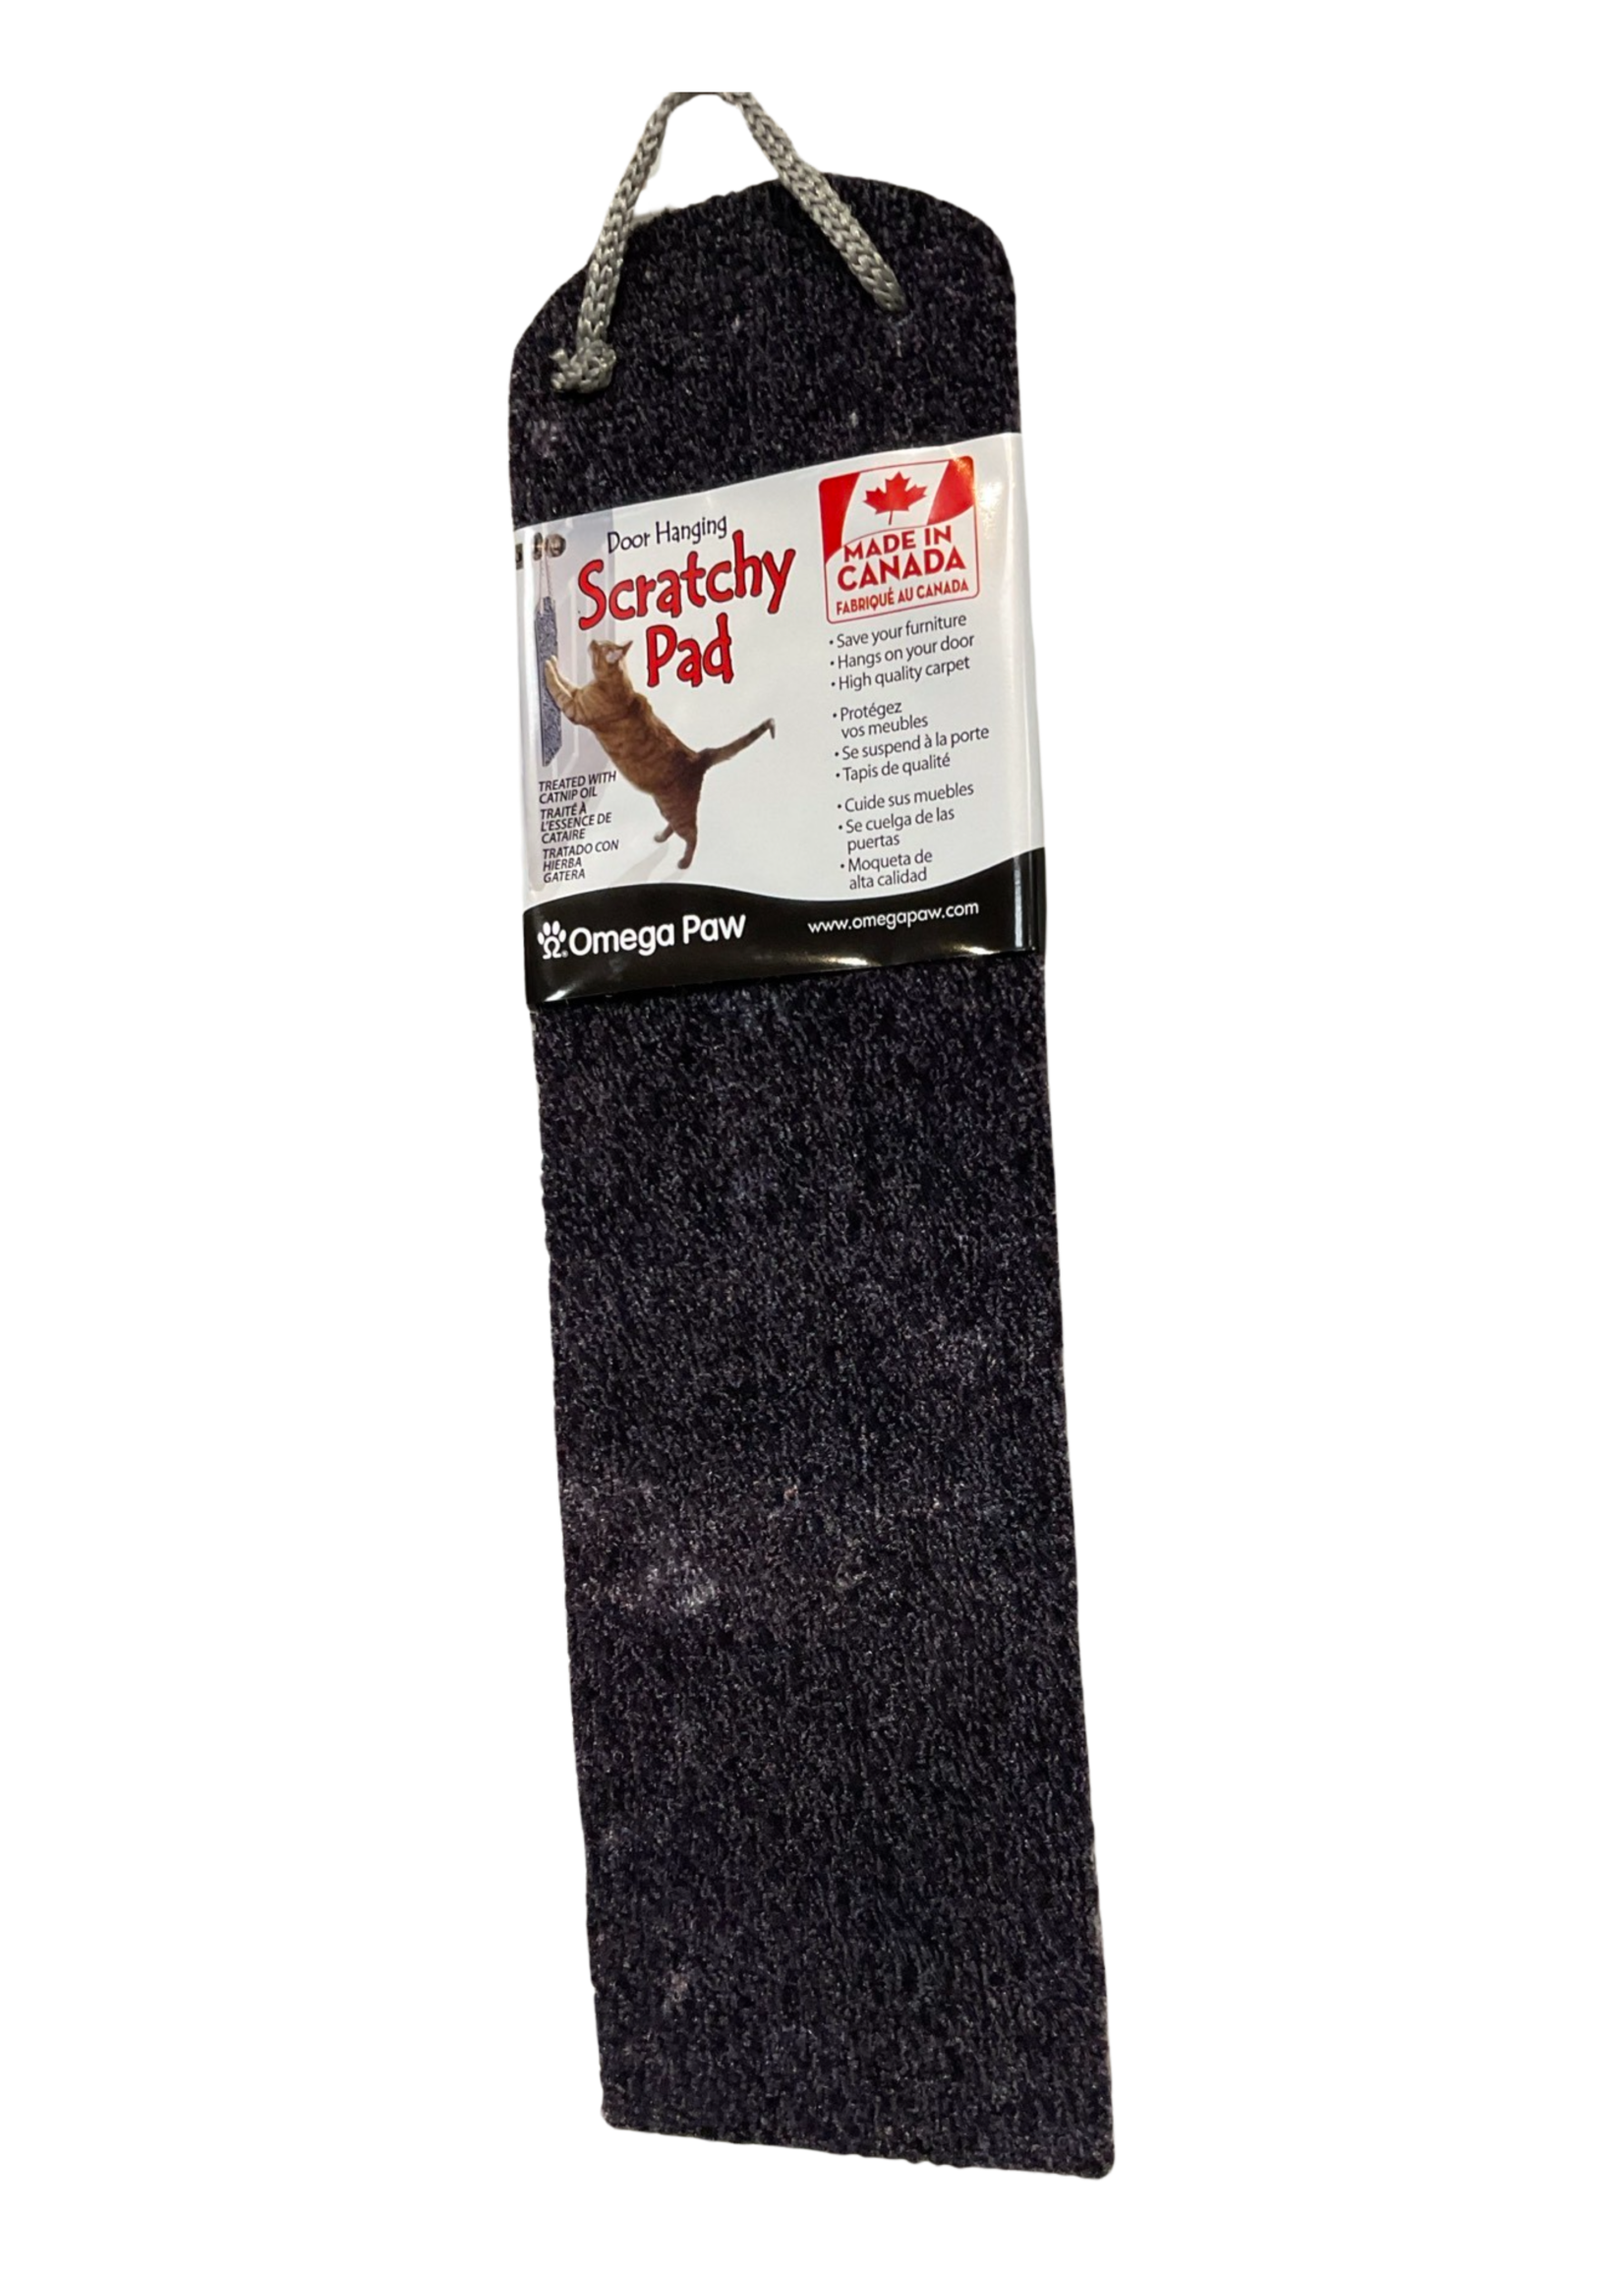 Omega Paw Door Hanging Scratchy Pad